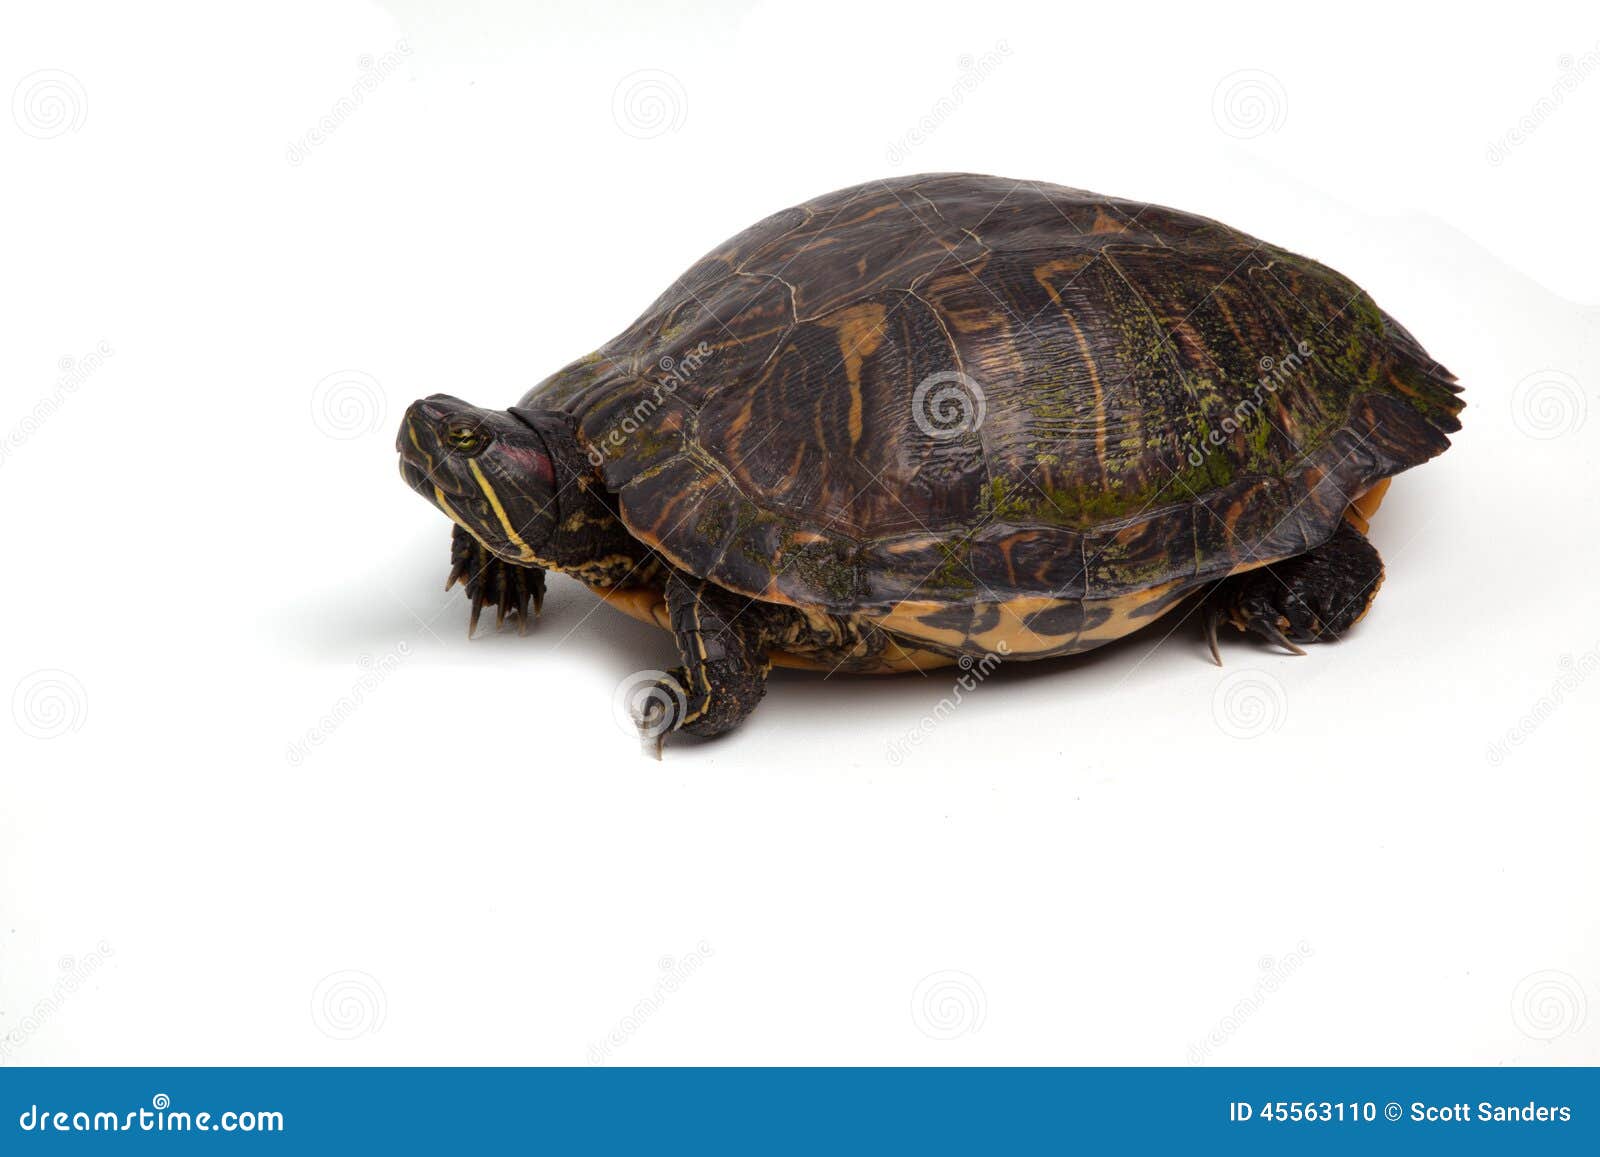 Red-Eared Slider stock photo. Image of turtle, animal - 45563110